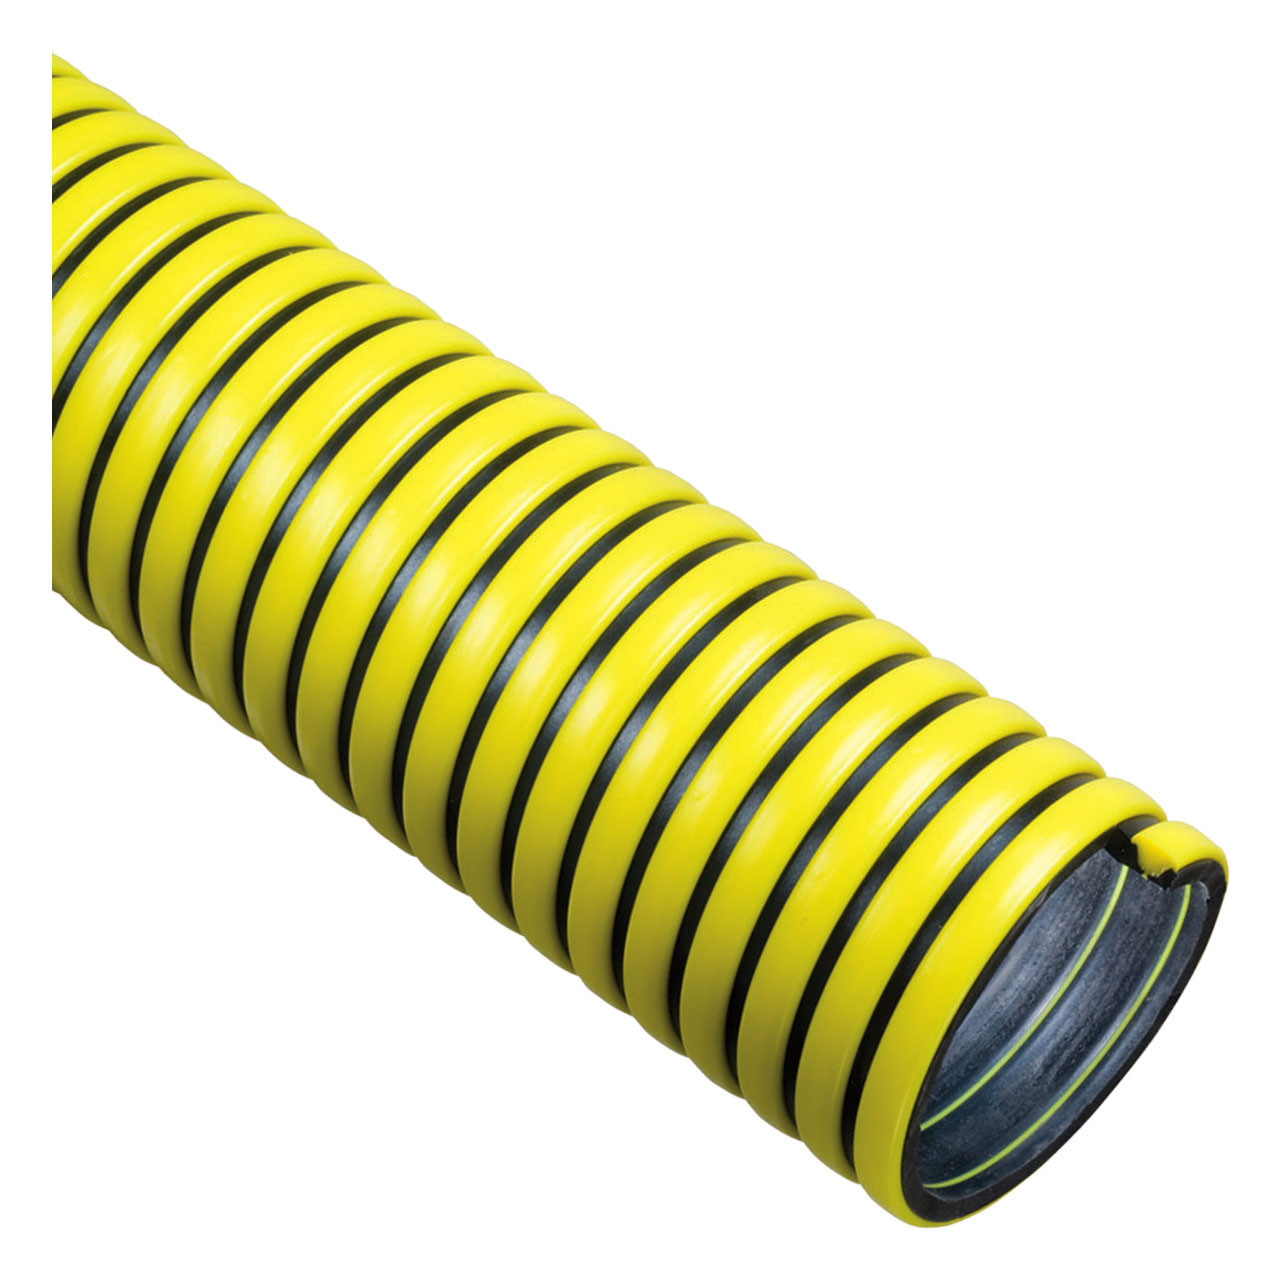 Tigerflex TY Series EPDM Tiger Yellow Suction Hose with Polyethylene Helix 50 PSI Max Pressure 1-1//2 inches ID 100 feet Length